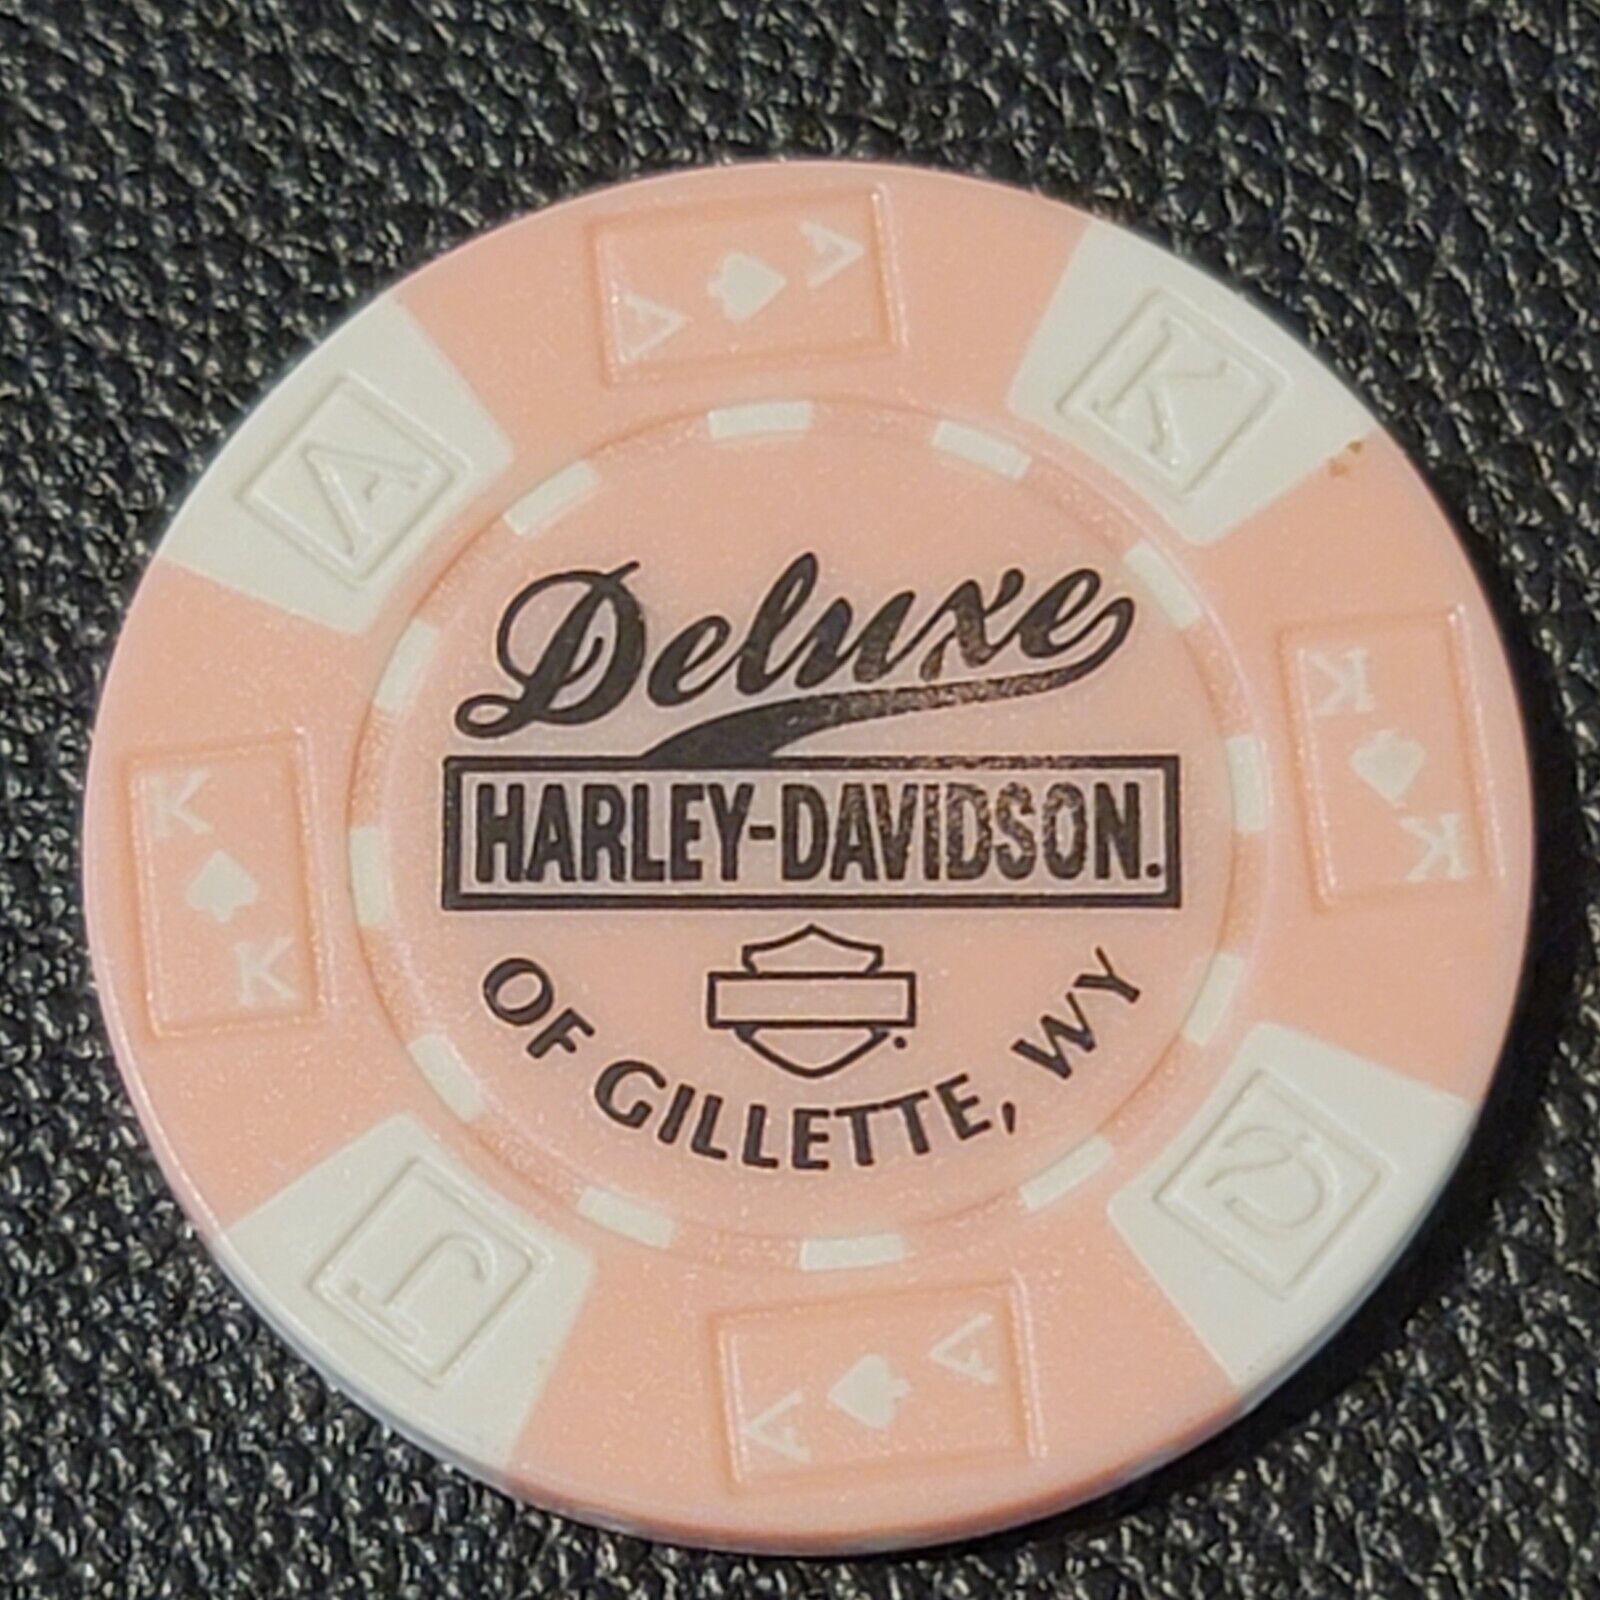 DELUXE HD OF GILLETTE ~ WYOMING (Pink AKQJ) Harley Davidson Poker Chip